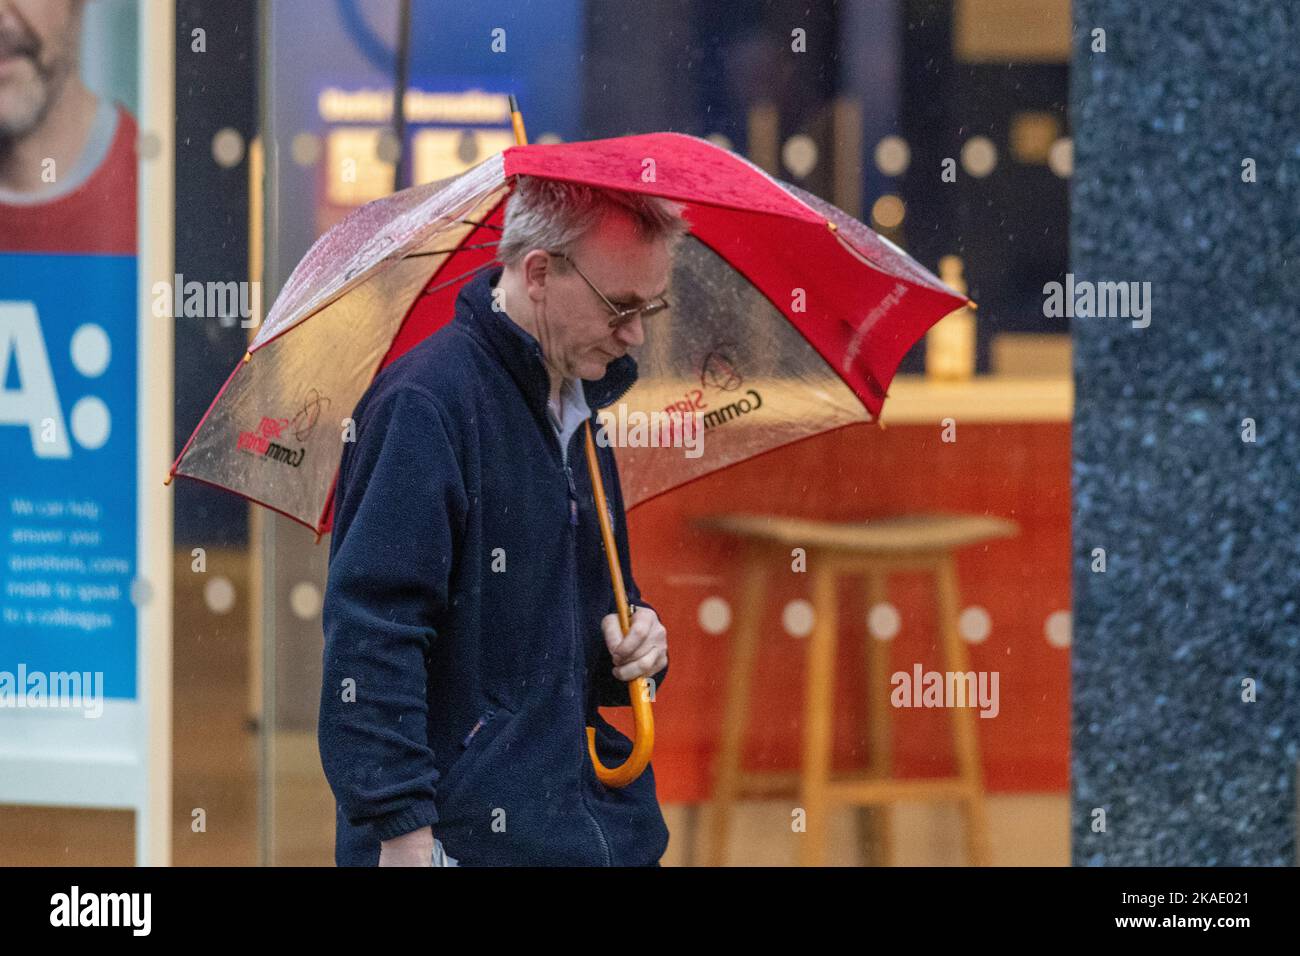 Preston, Lancashire. UK Weather. 2 Nov 2022. Very wet and windy in the city centre as heavy rain and strong winds move in from the south-west. Strong gusts at times drenched shoppers, and broke umbrellas. Credit; MediaWorldImages/AlamyLiveNews Stock Photo